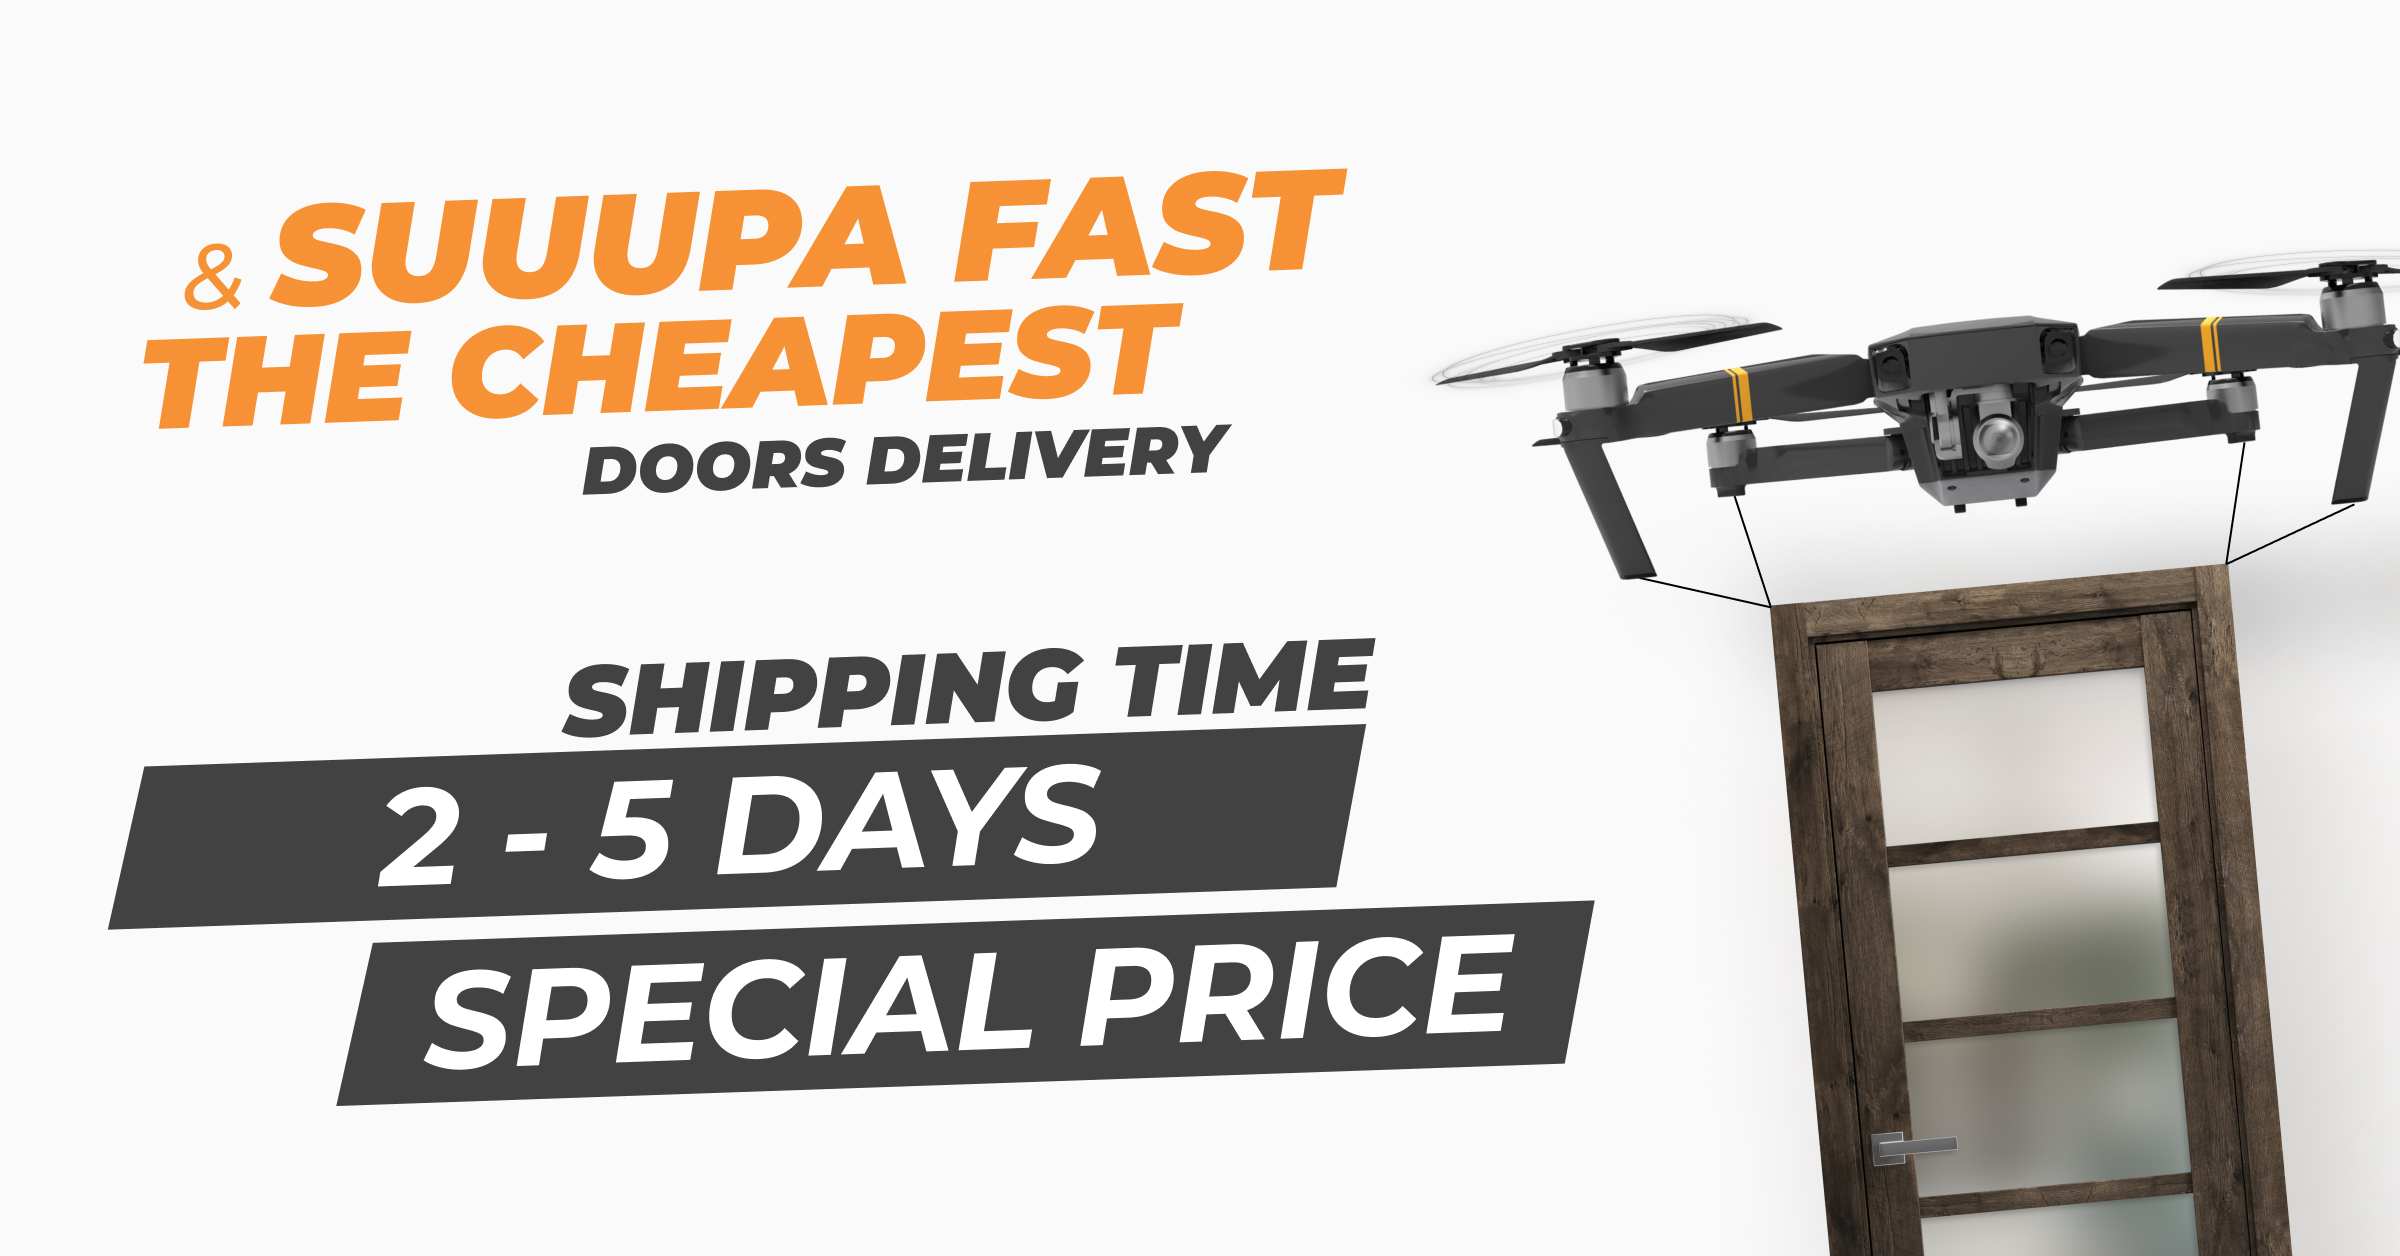 SUUUPA FAST & THE CHEAPEST